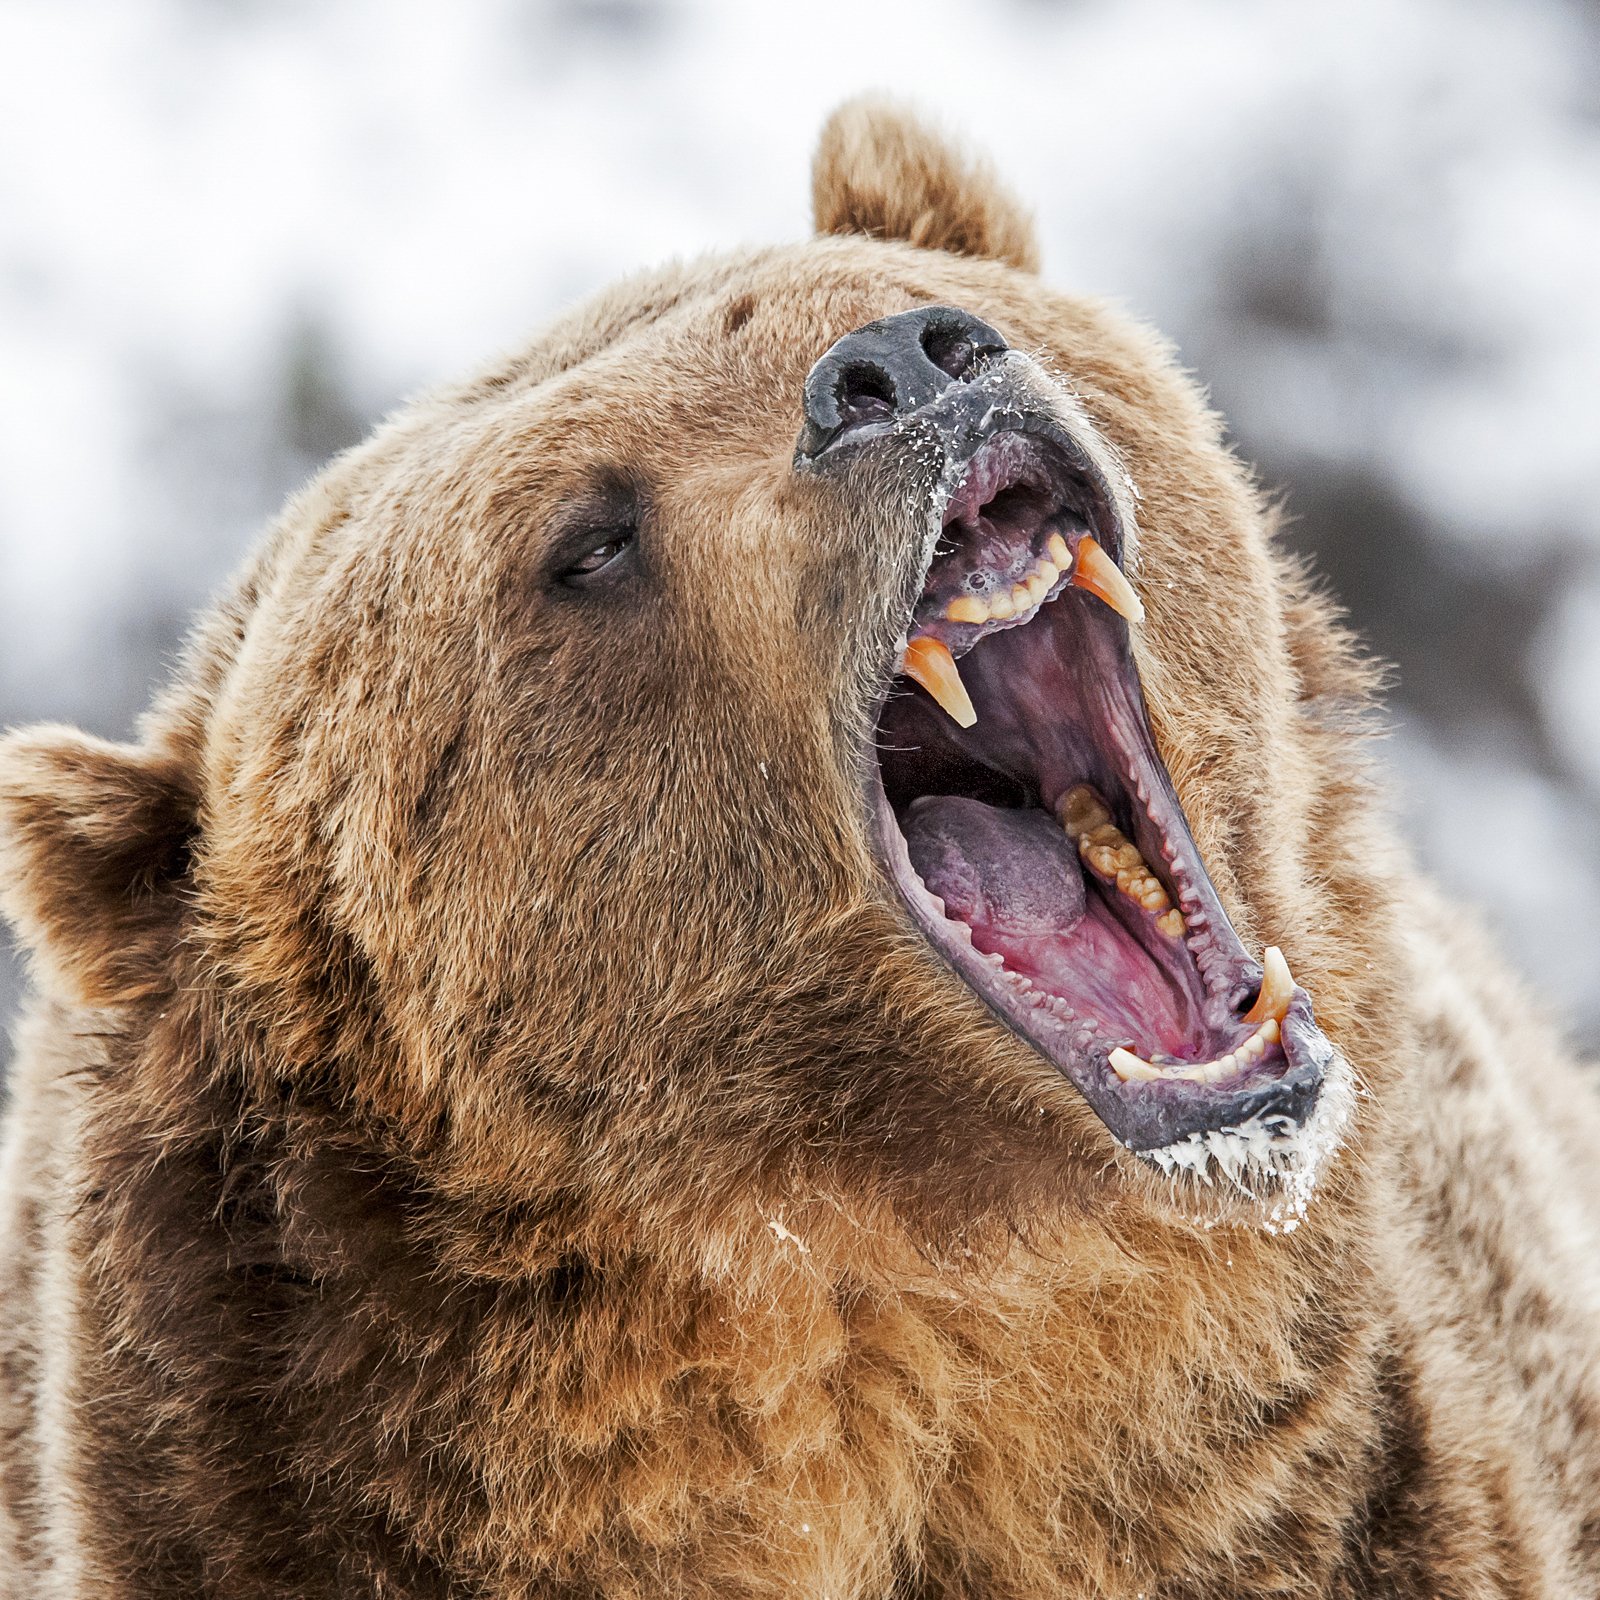 Markets Update: Bear Market Adds Cryptocurrency Trading Uncertainty